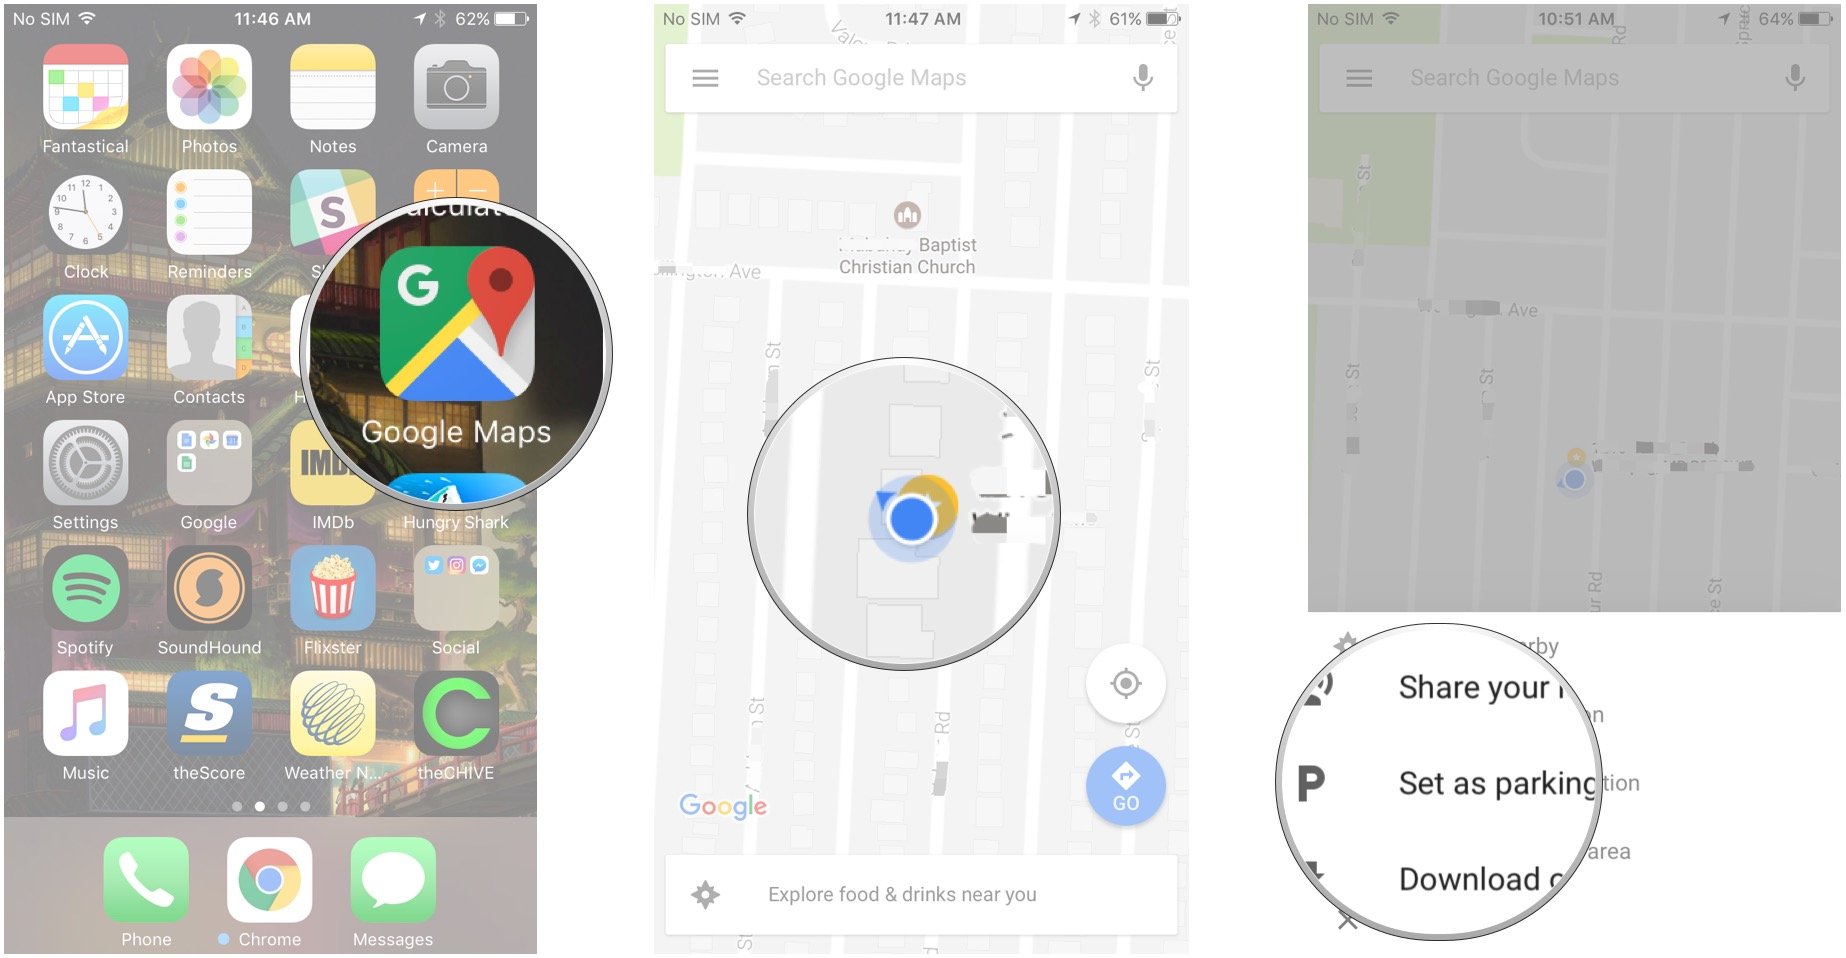 Launch Google Maps, tap your location, tap Set as parking location